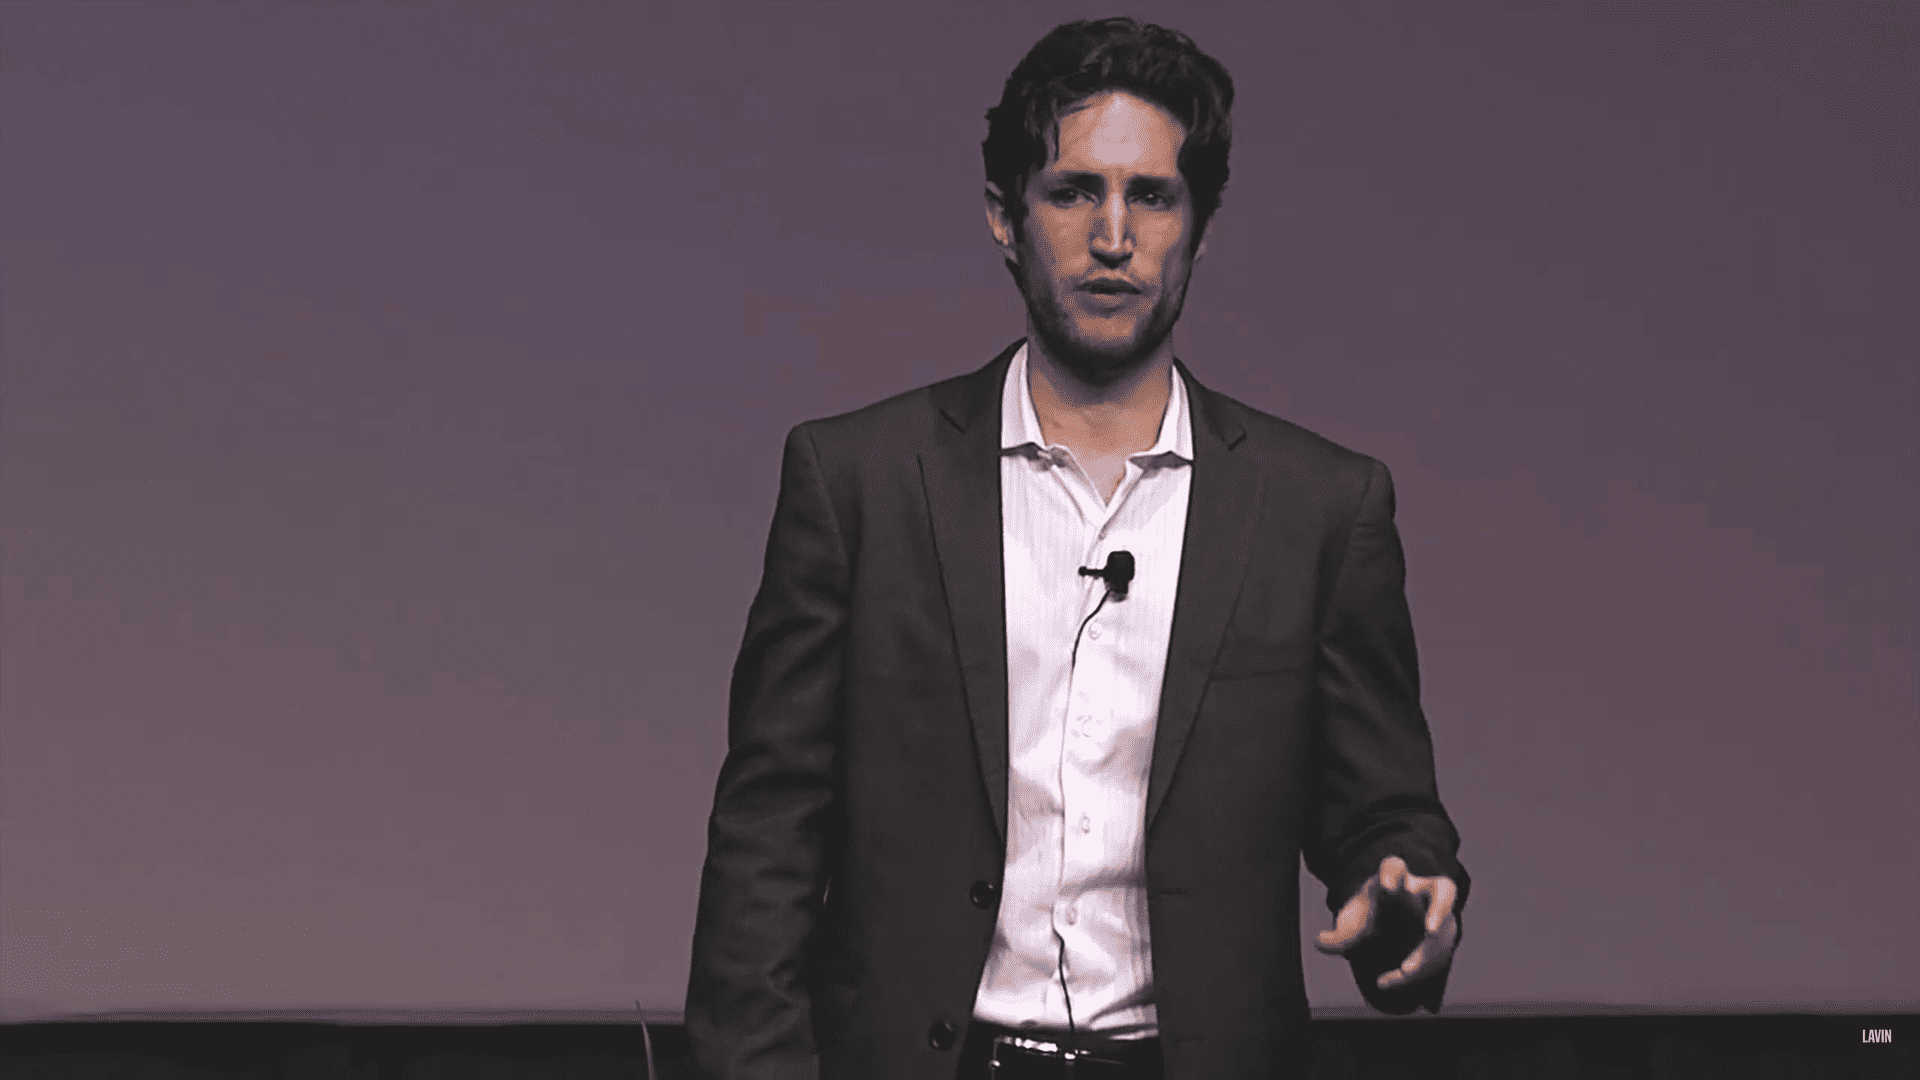 Adam Alter, a light-skinned man with dark hair, gives a talk onstage.